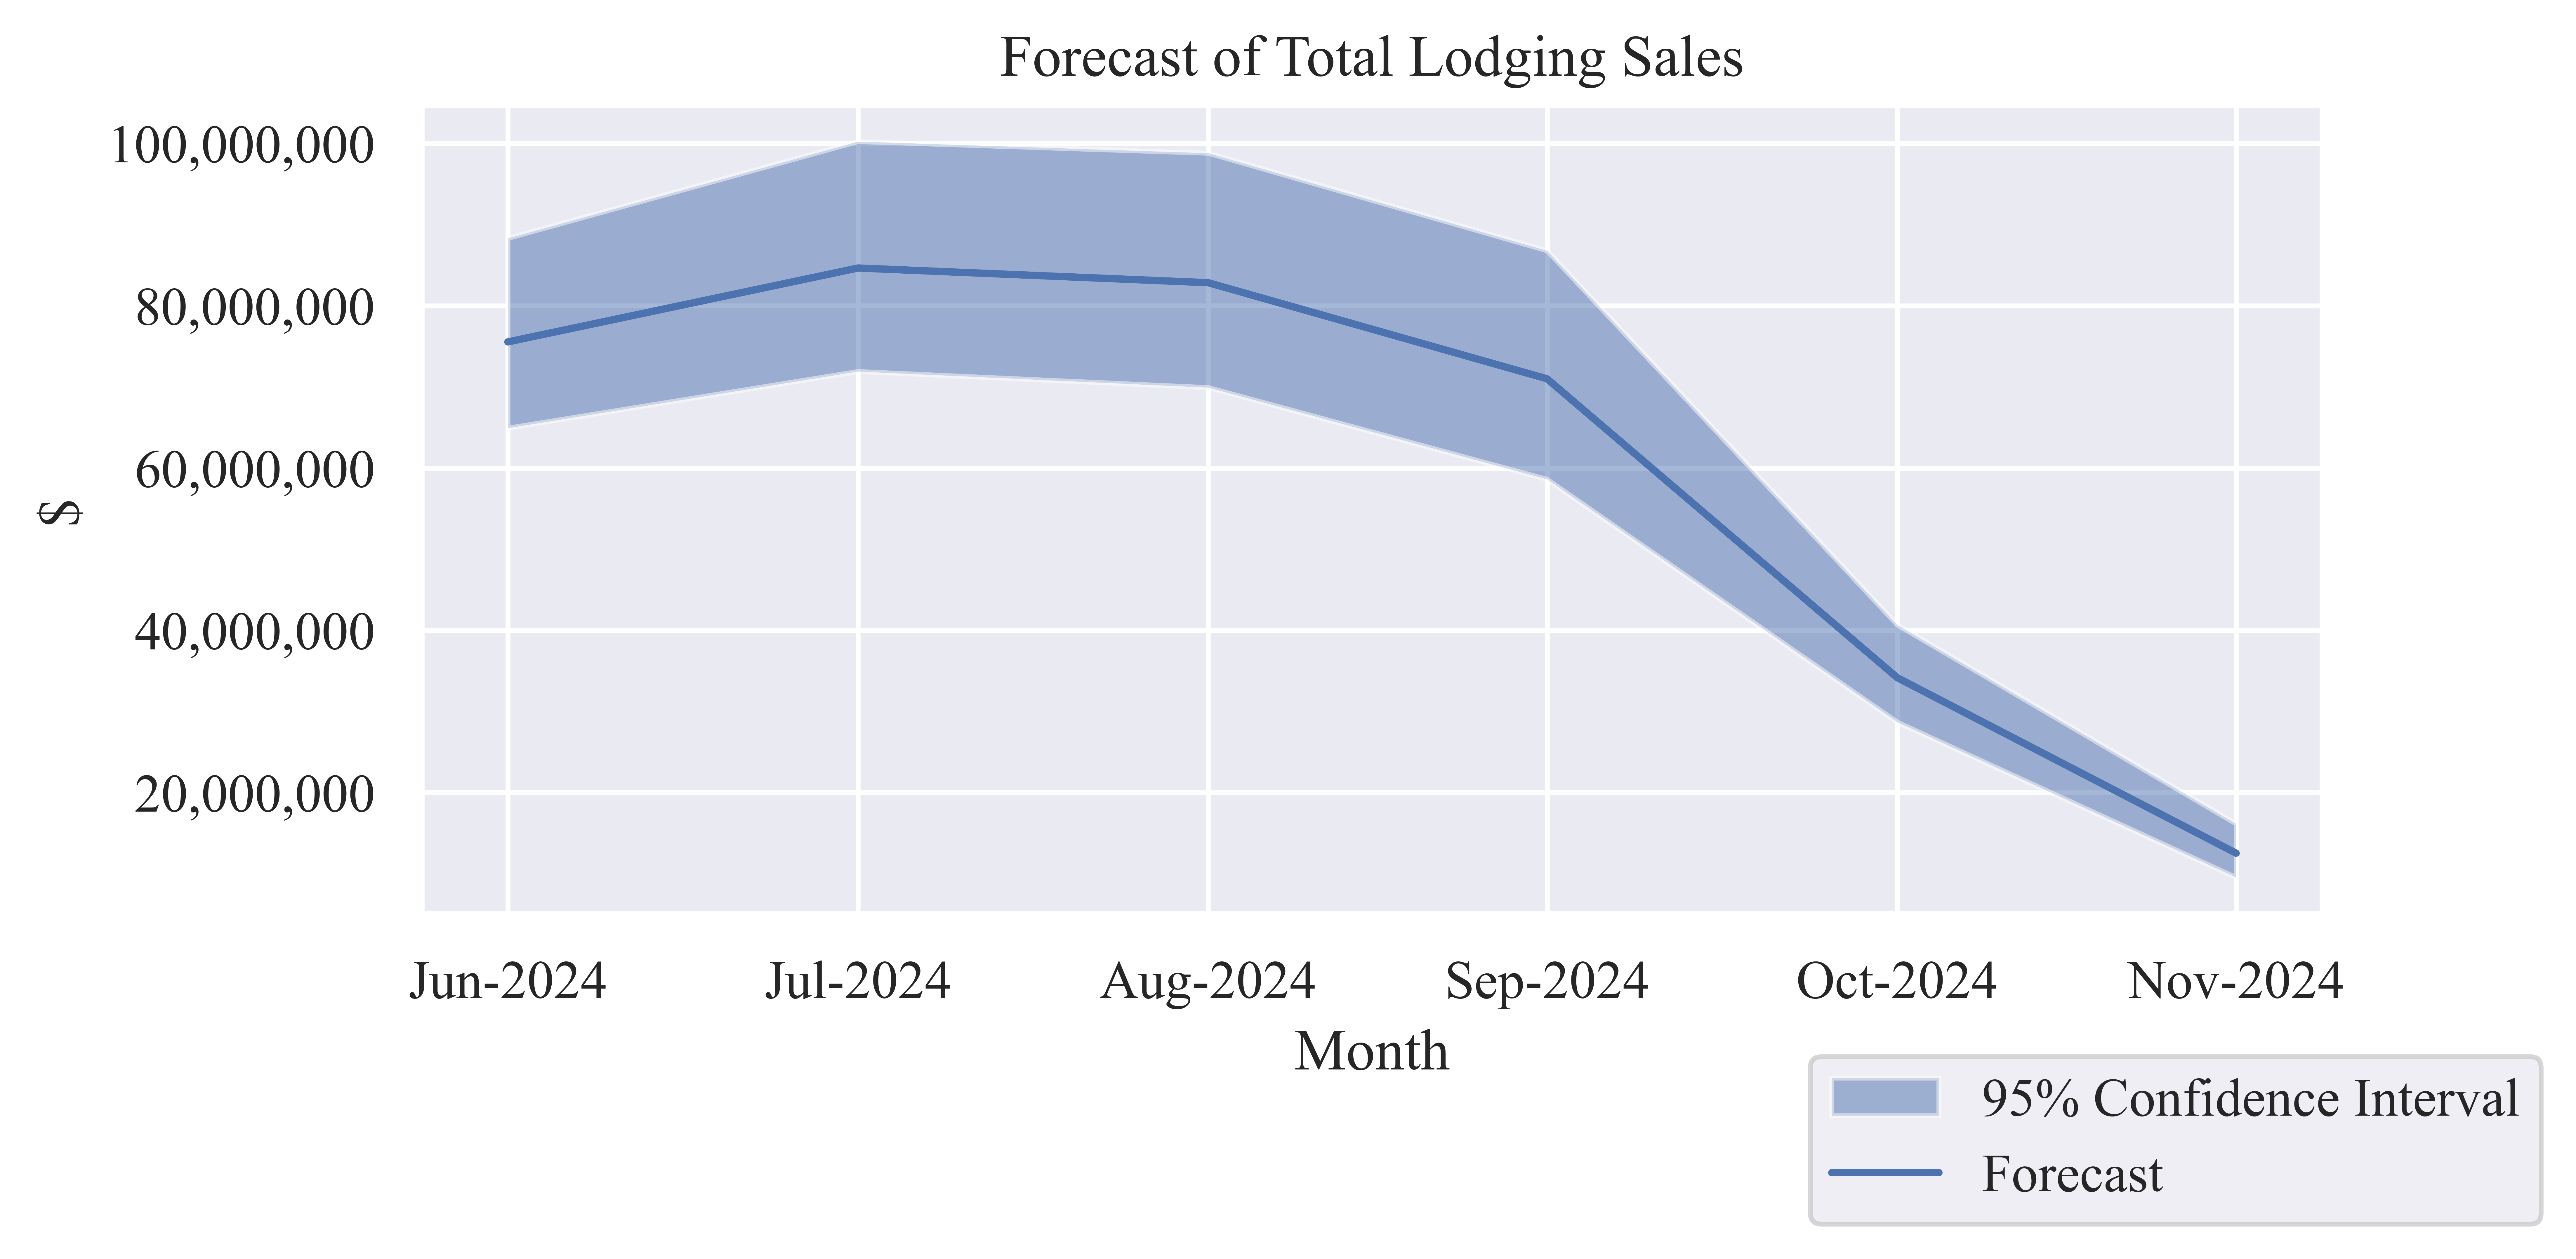 Forecast of Monthly Lodging Sales